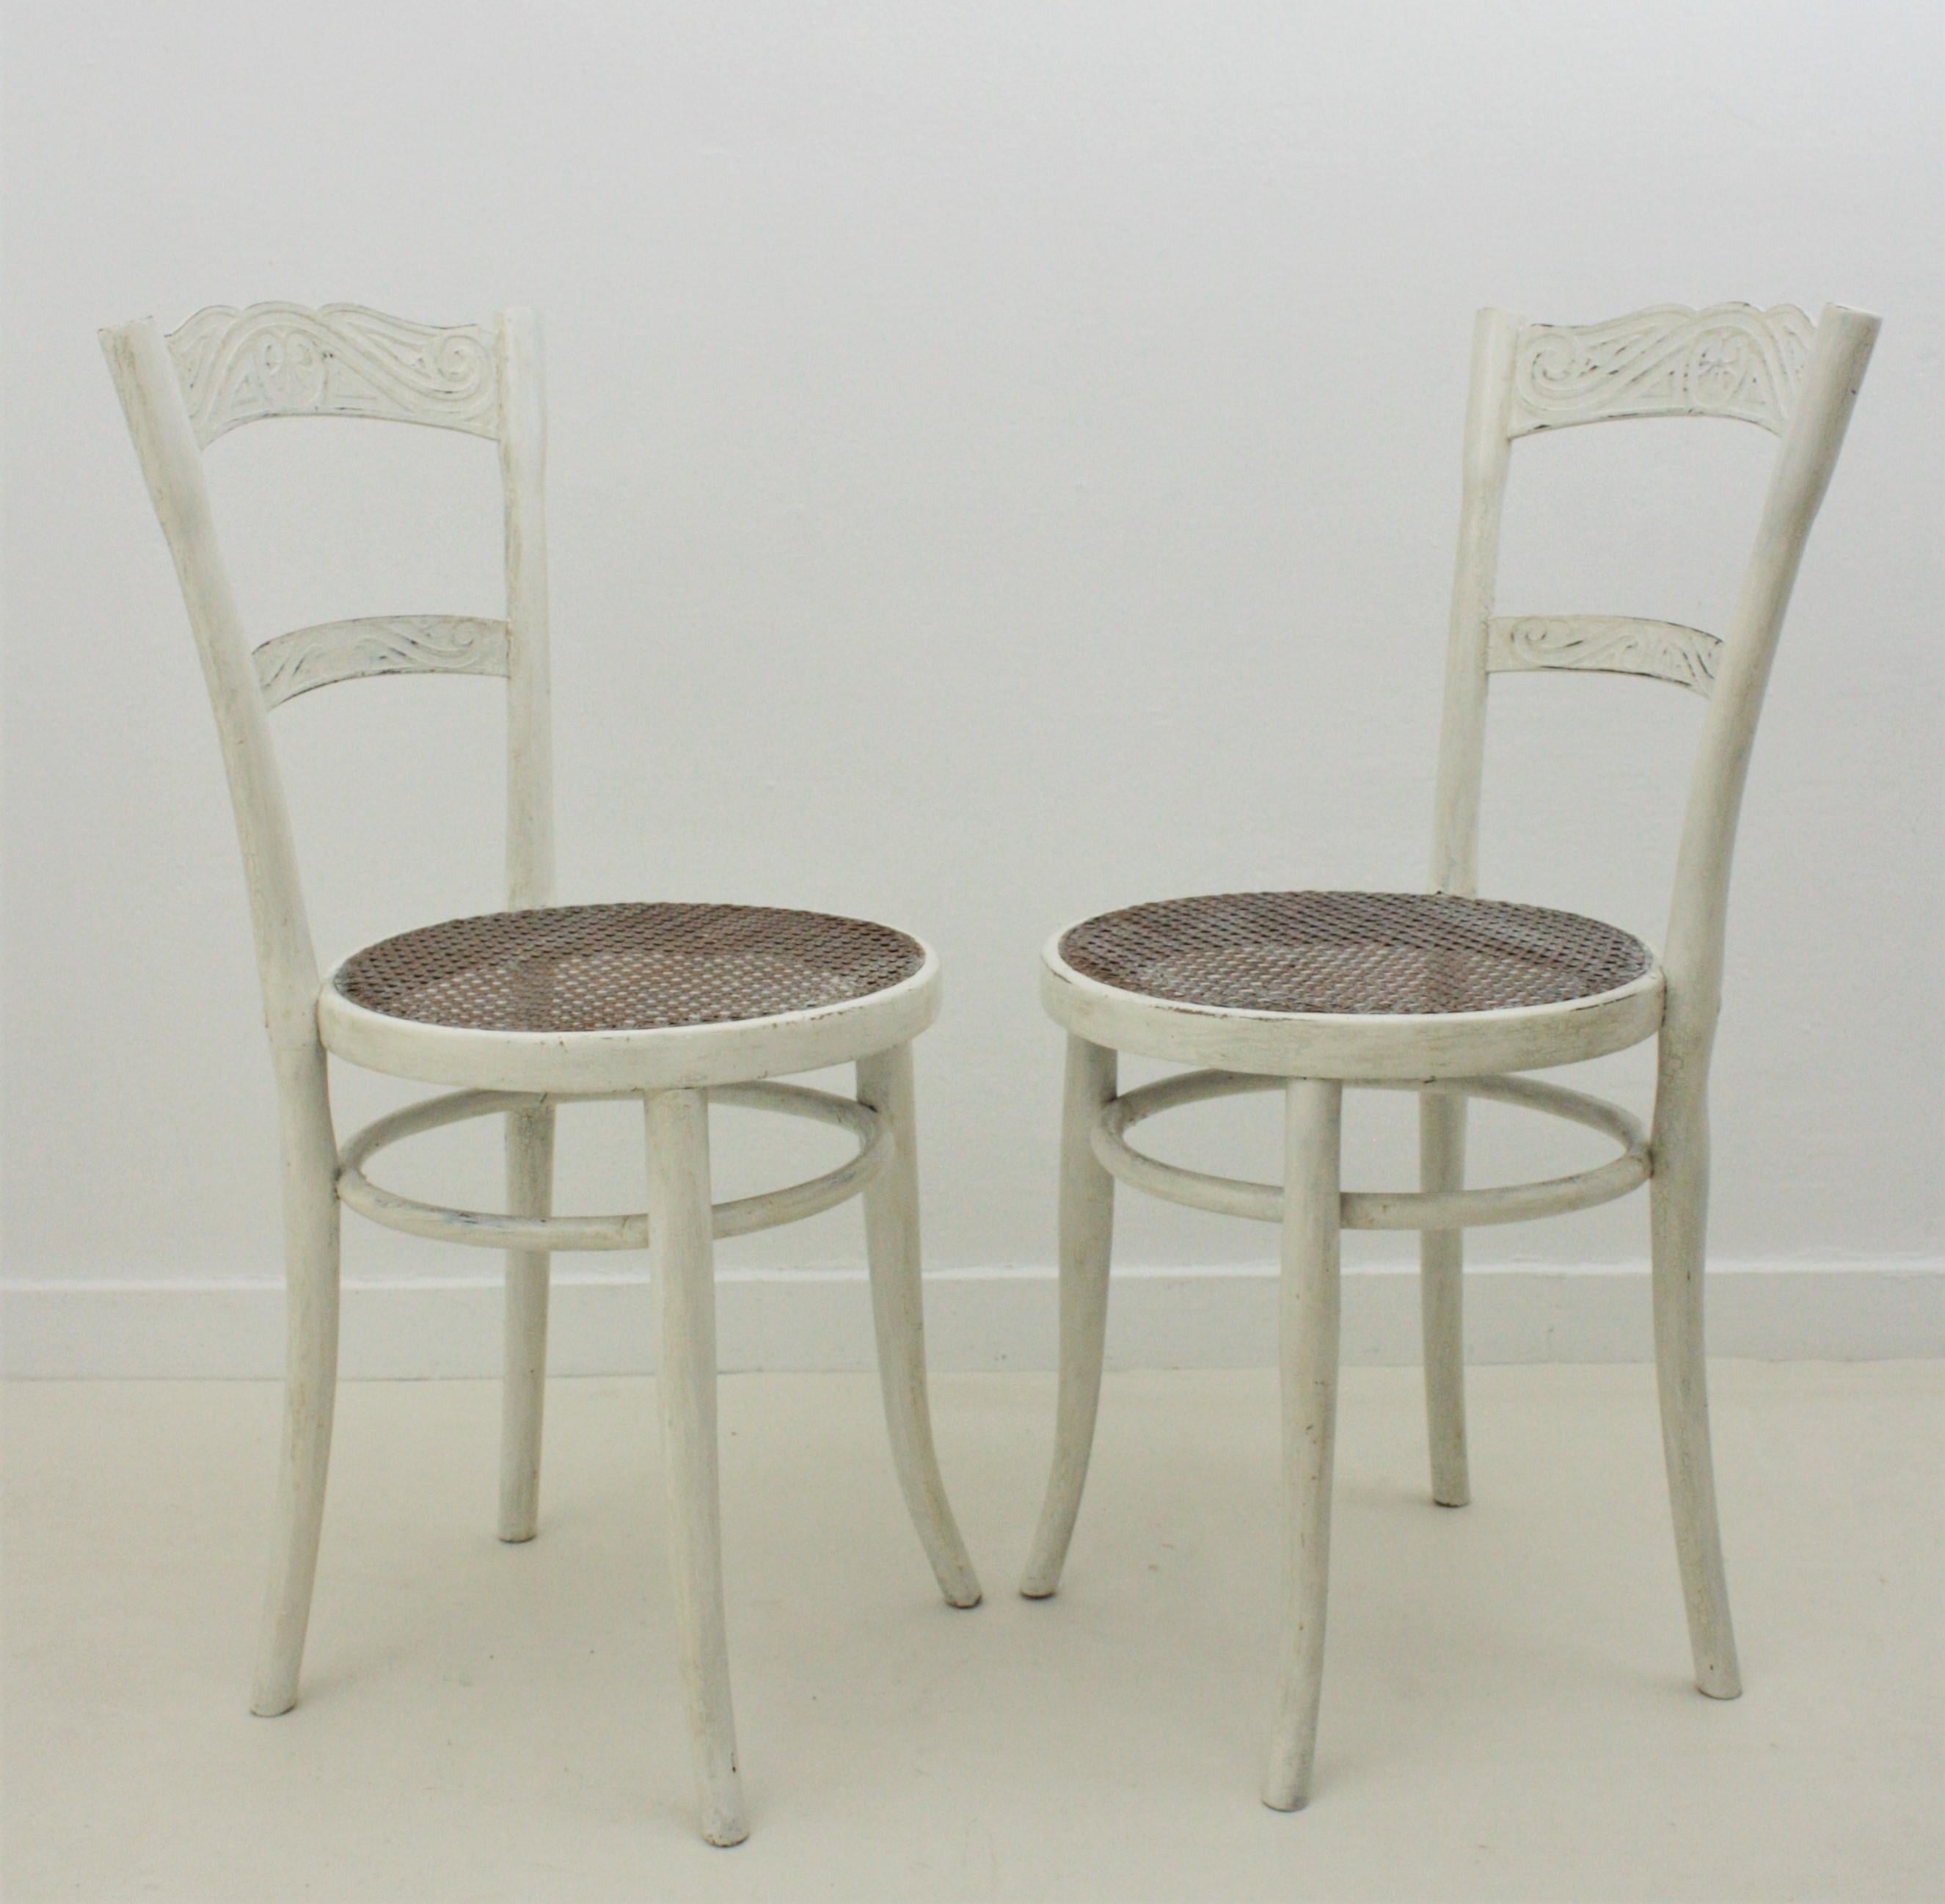 Jacob & Josef Kohn Vienna Secession Patinated Chairs with Wicker Seats, Pair In Good Condition For Sale In Barcelona, ES